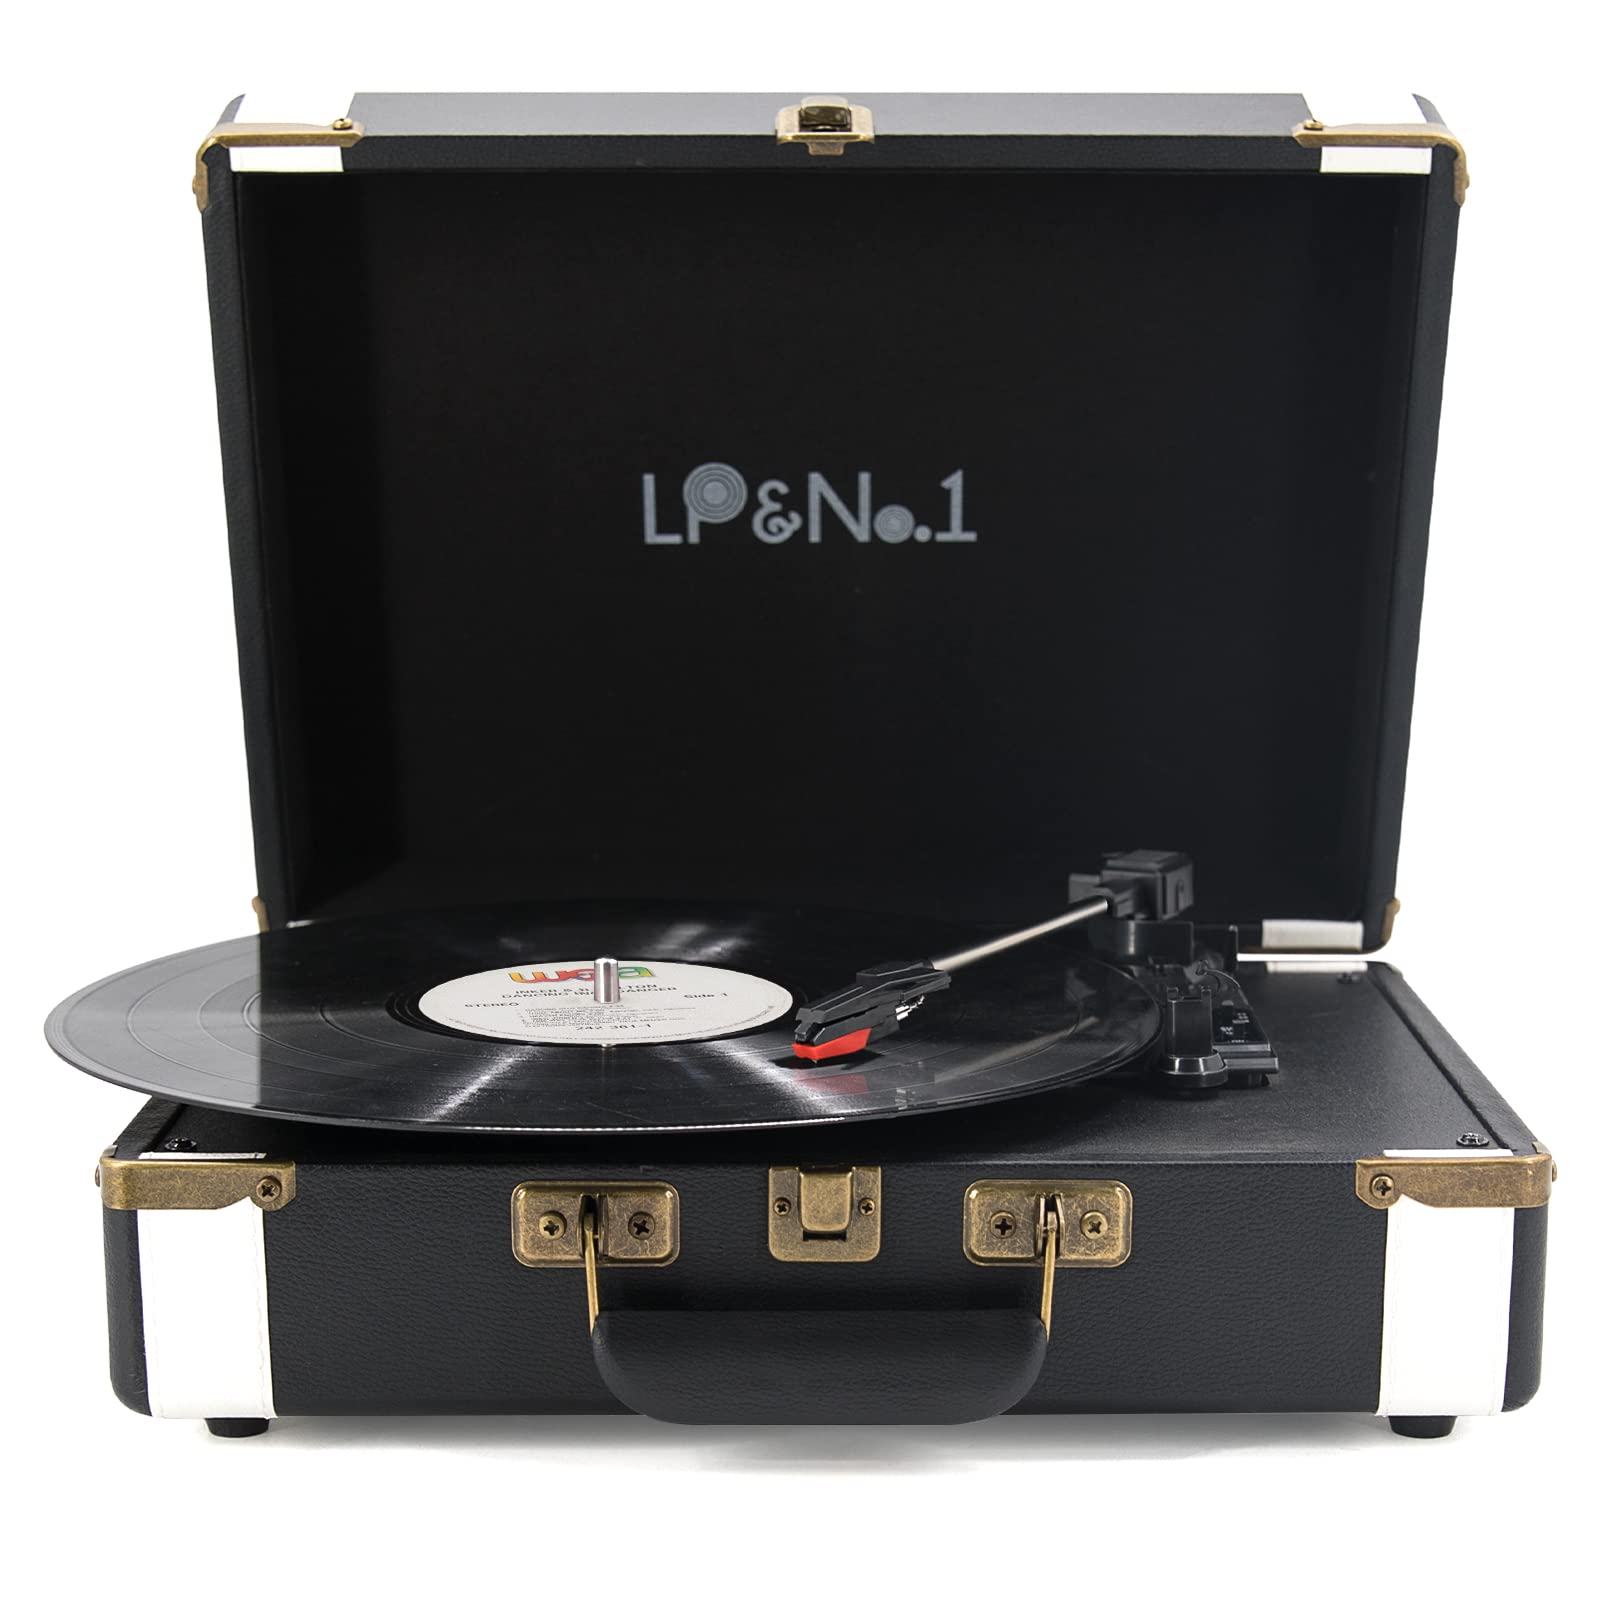 LP&No.1 Suitcase Portable Turntable with Built in Stereo Speakers